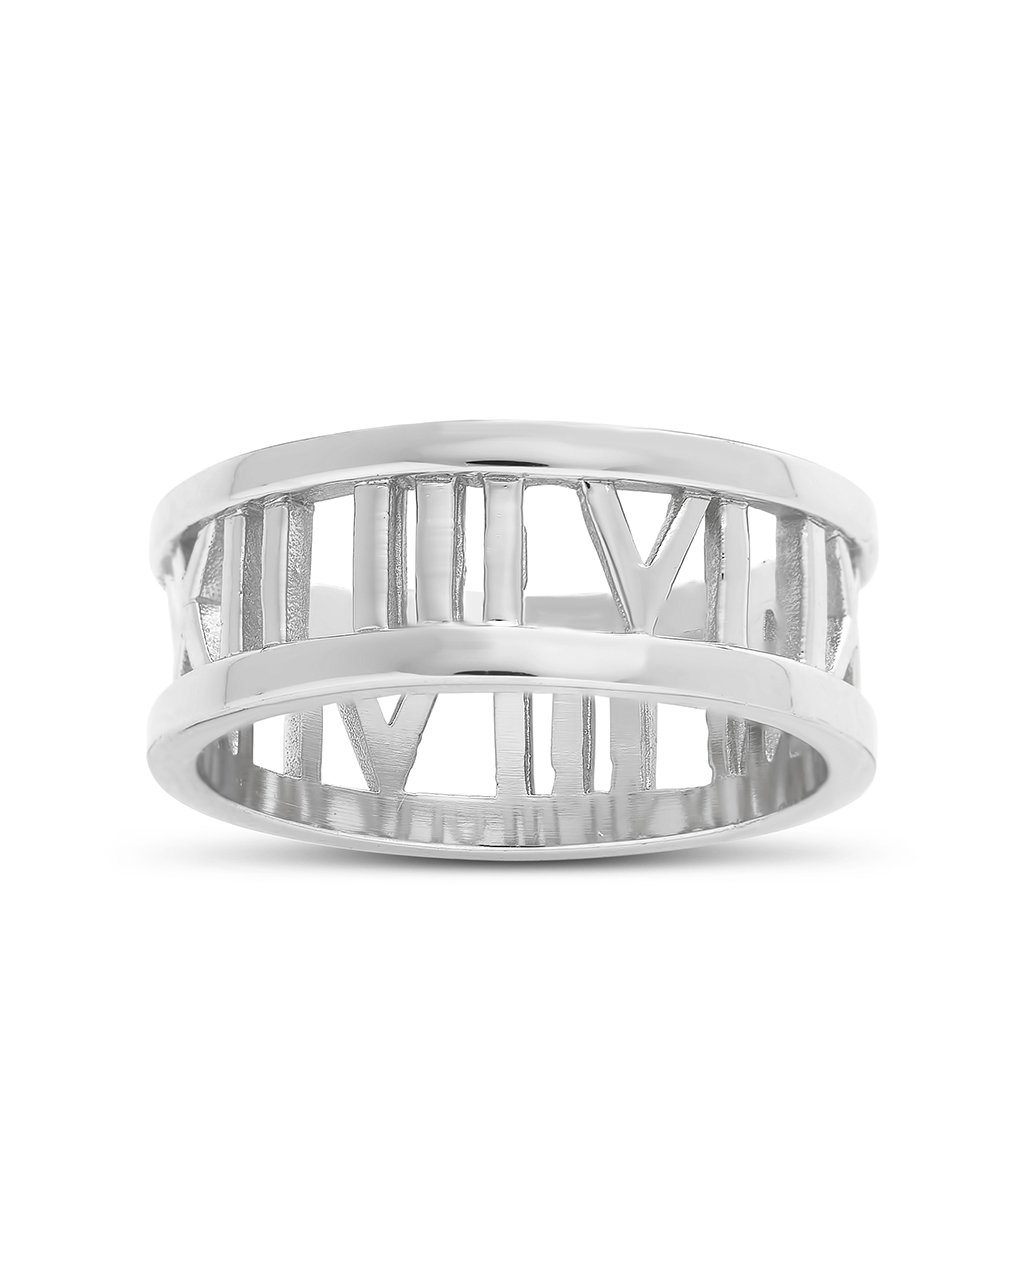 Tiffany & Co. Roman Numerals Sterling Silver Ring